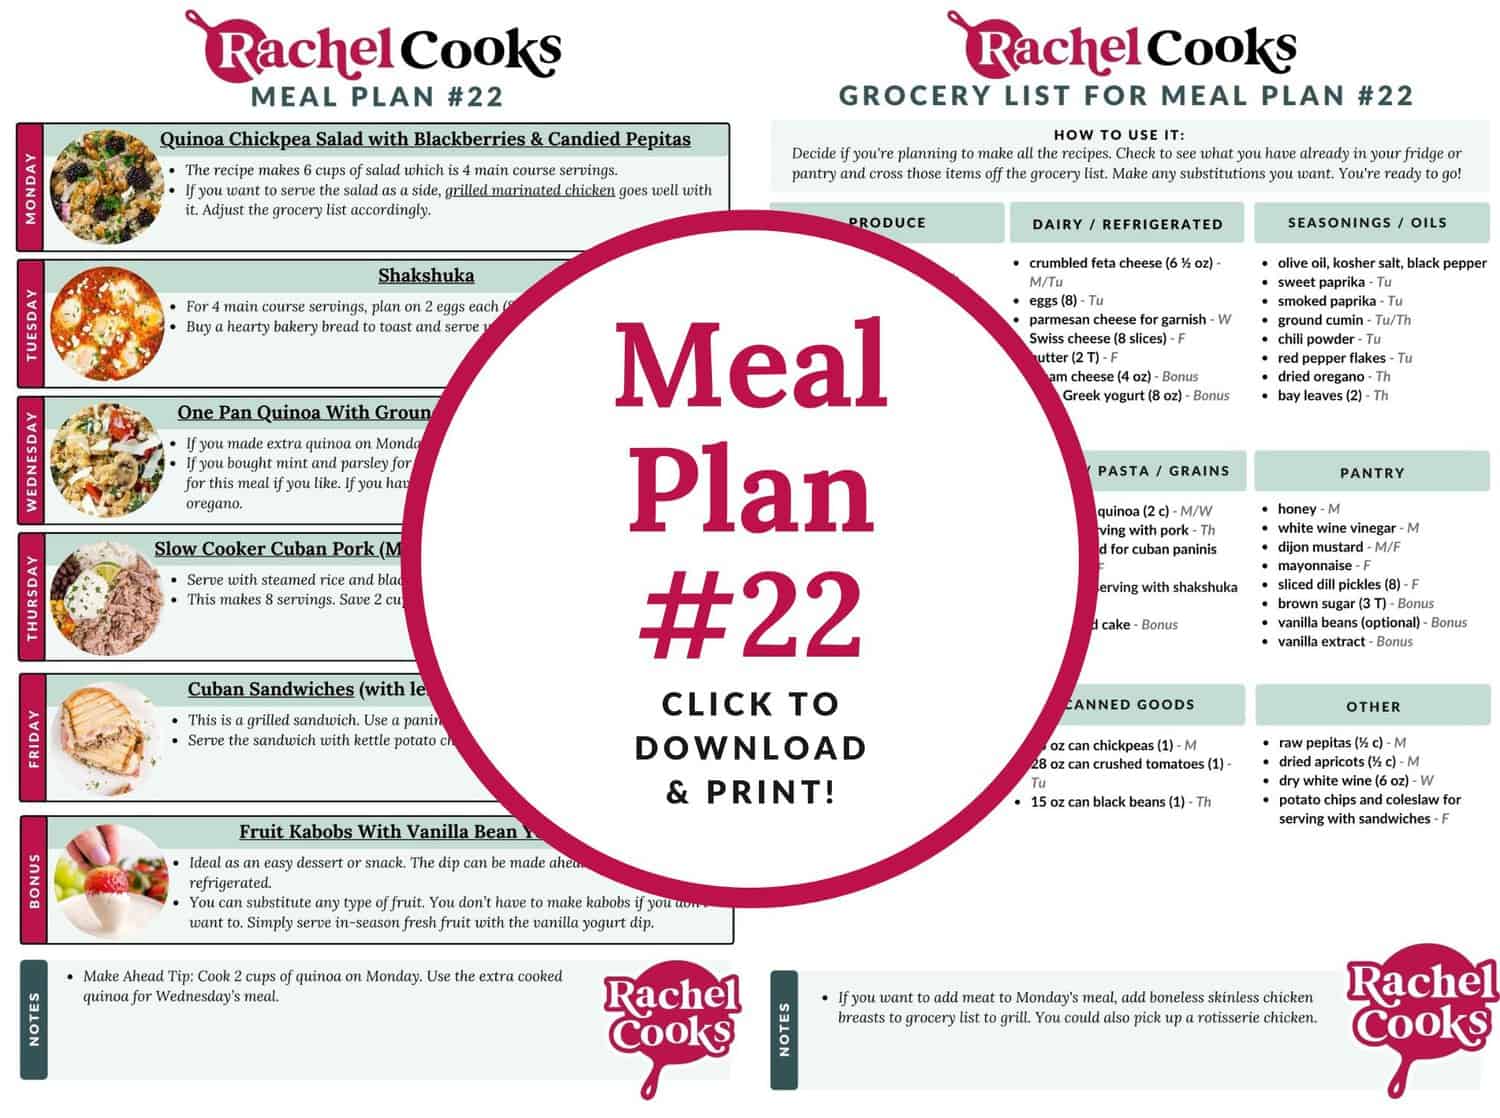 Meal plan 22 preview image.